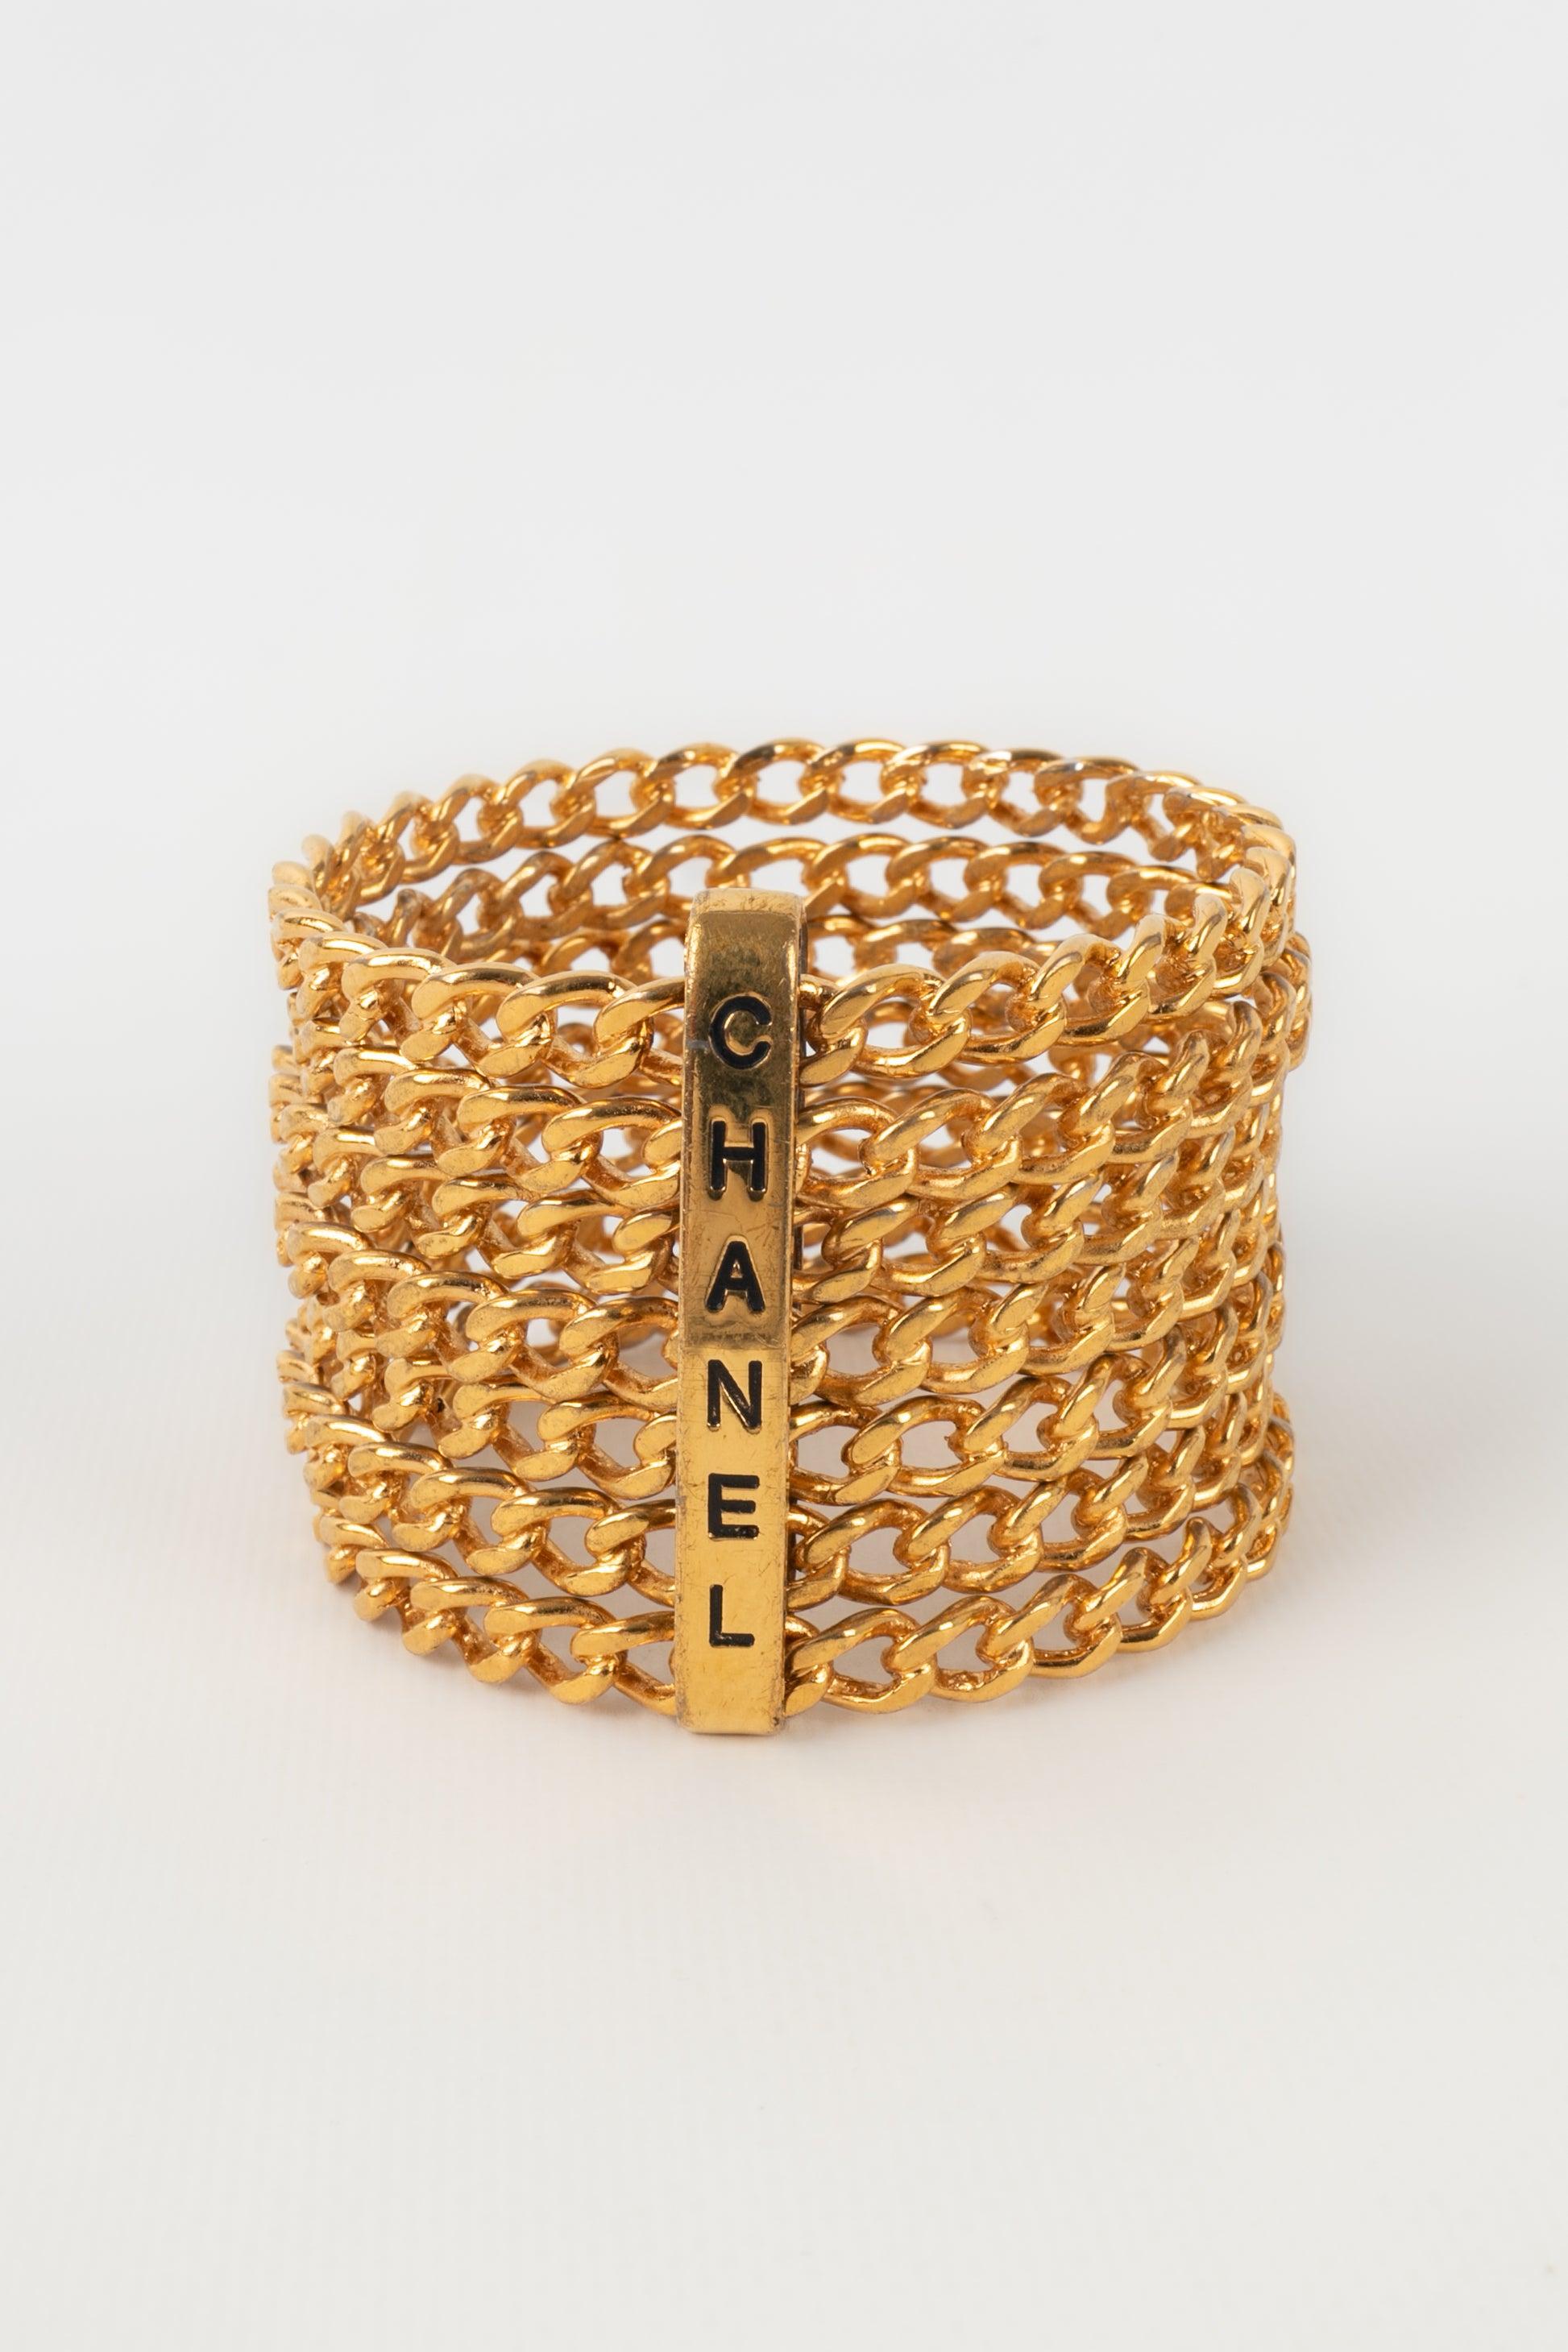 Chanel - (Made in France) Golden metal bracelet. Cruise 1993 Collection.

Additional information:
Condition: Very good condition
Dimensions: Circumference: 24 cm - Diameter: 6.7 cm - Height: 5.5 cm

Seller Reference: BRAB64
